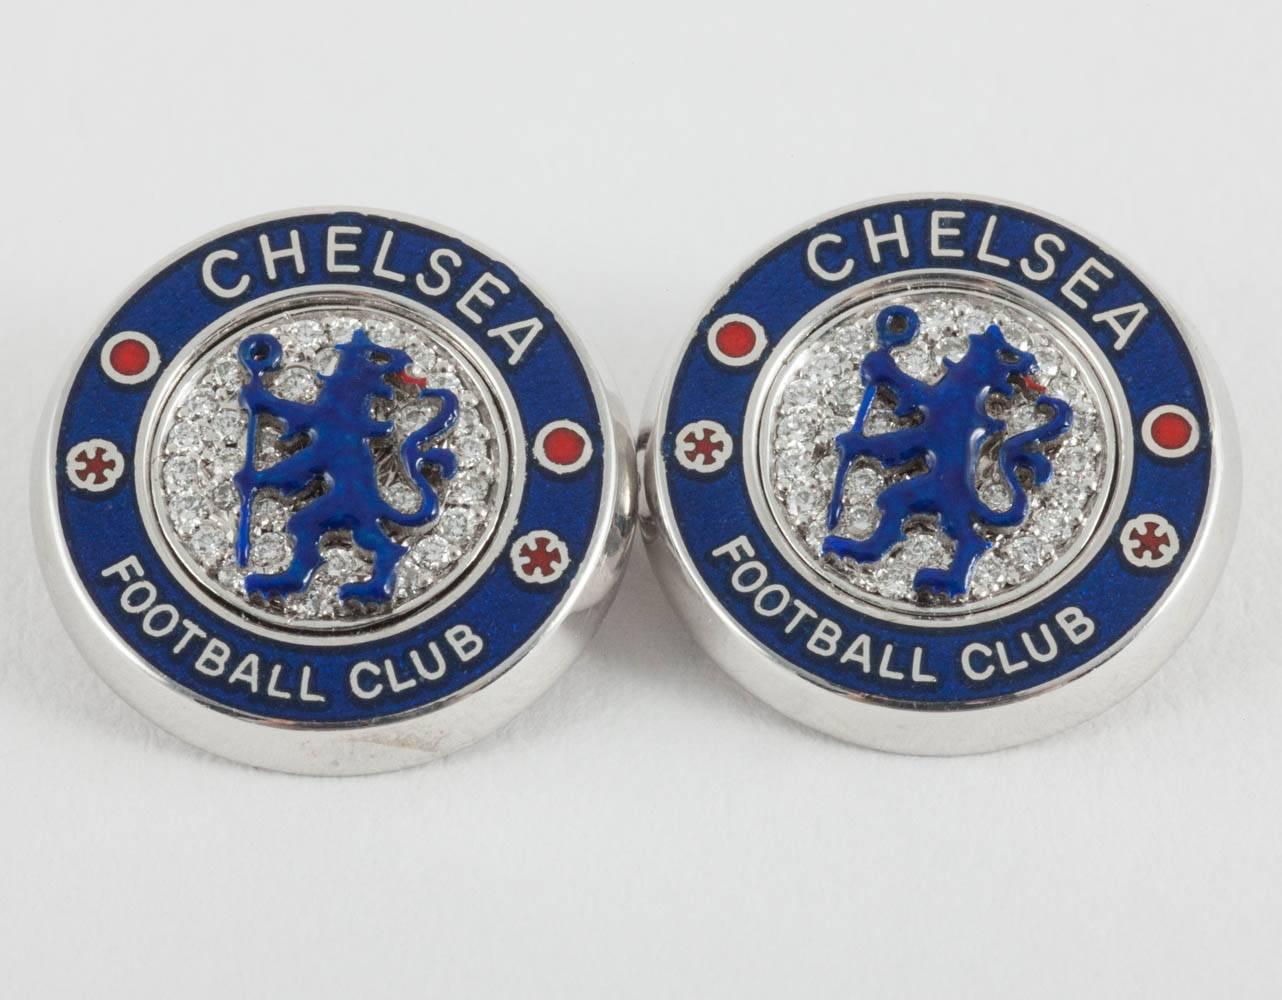 A modern pair of heavy, 18 carat white gold mounted double sided cufflinks of Chelsea Football Club. Circular in shape, finely detailed and set with brilliant cut diamonds together with the red and blue enamel of the clubs colours. Chain link